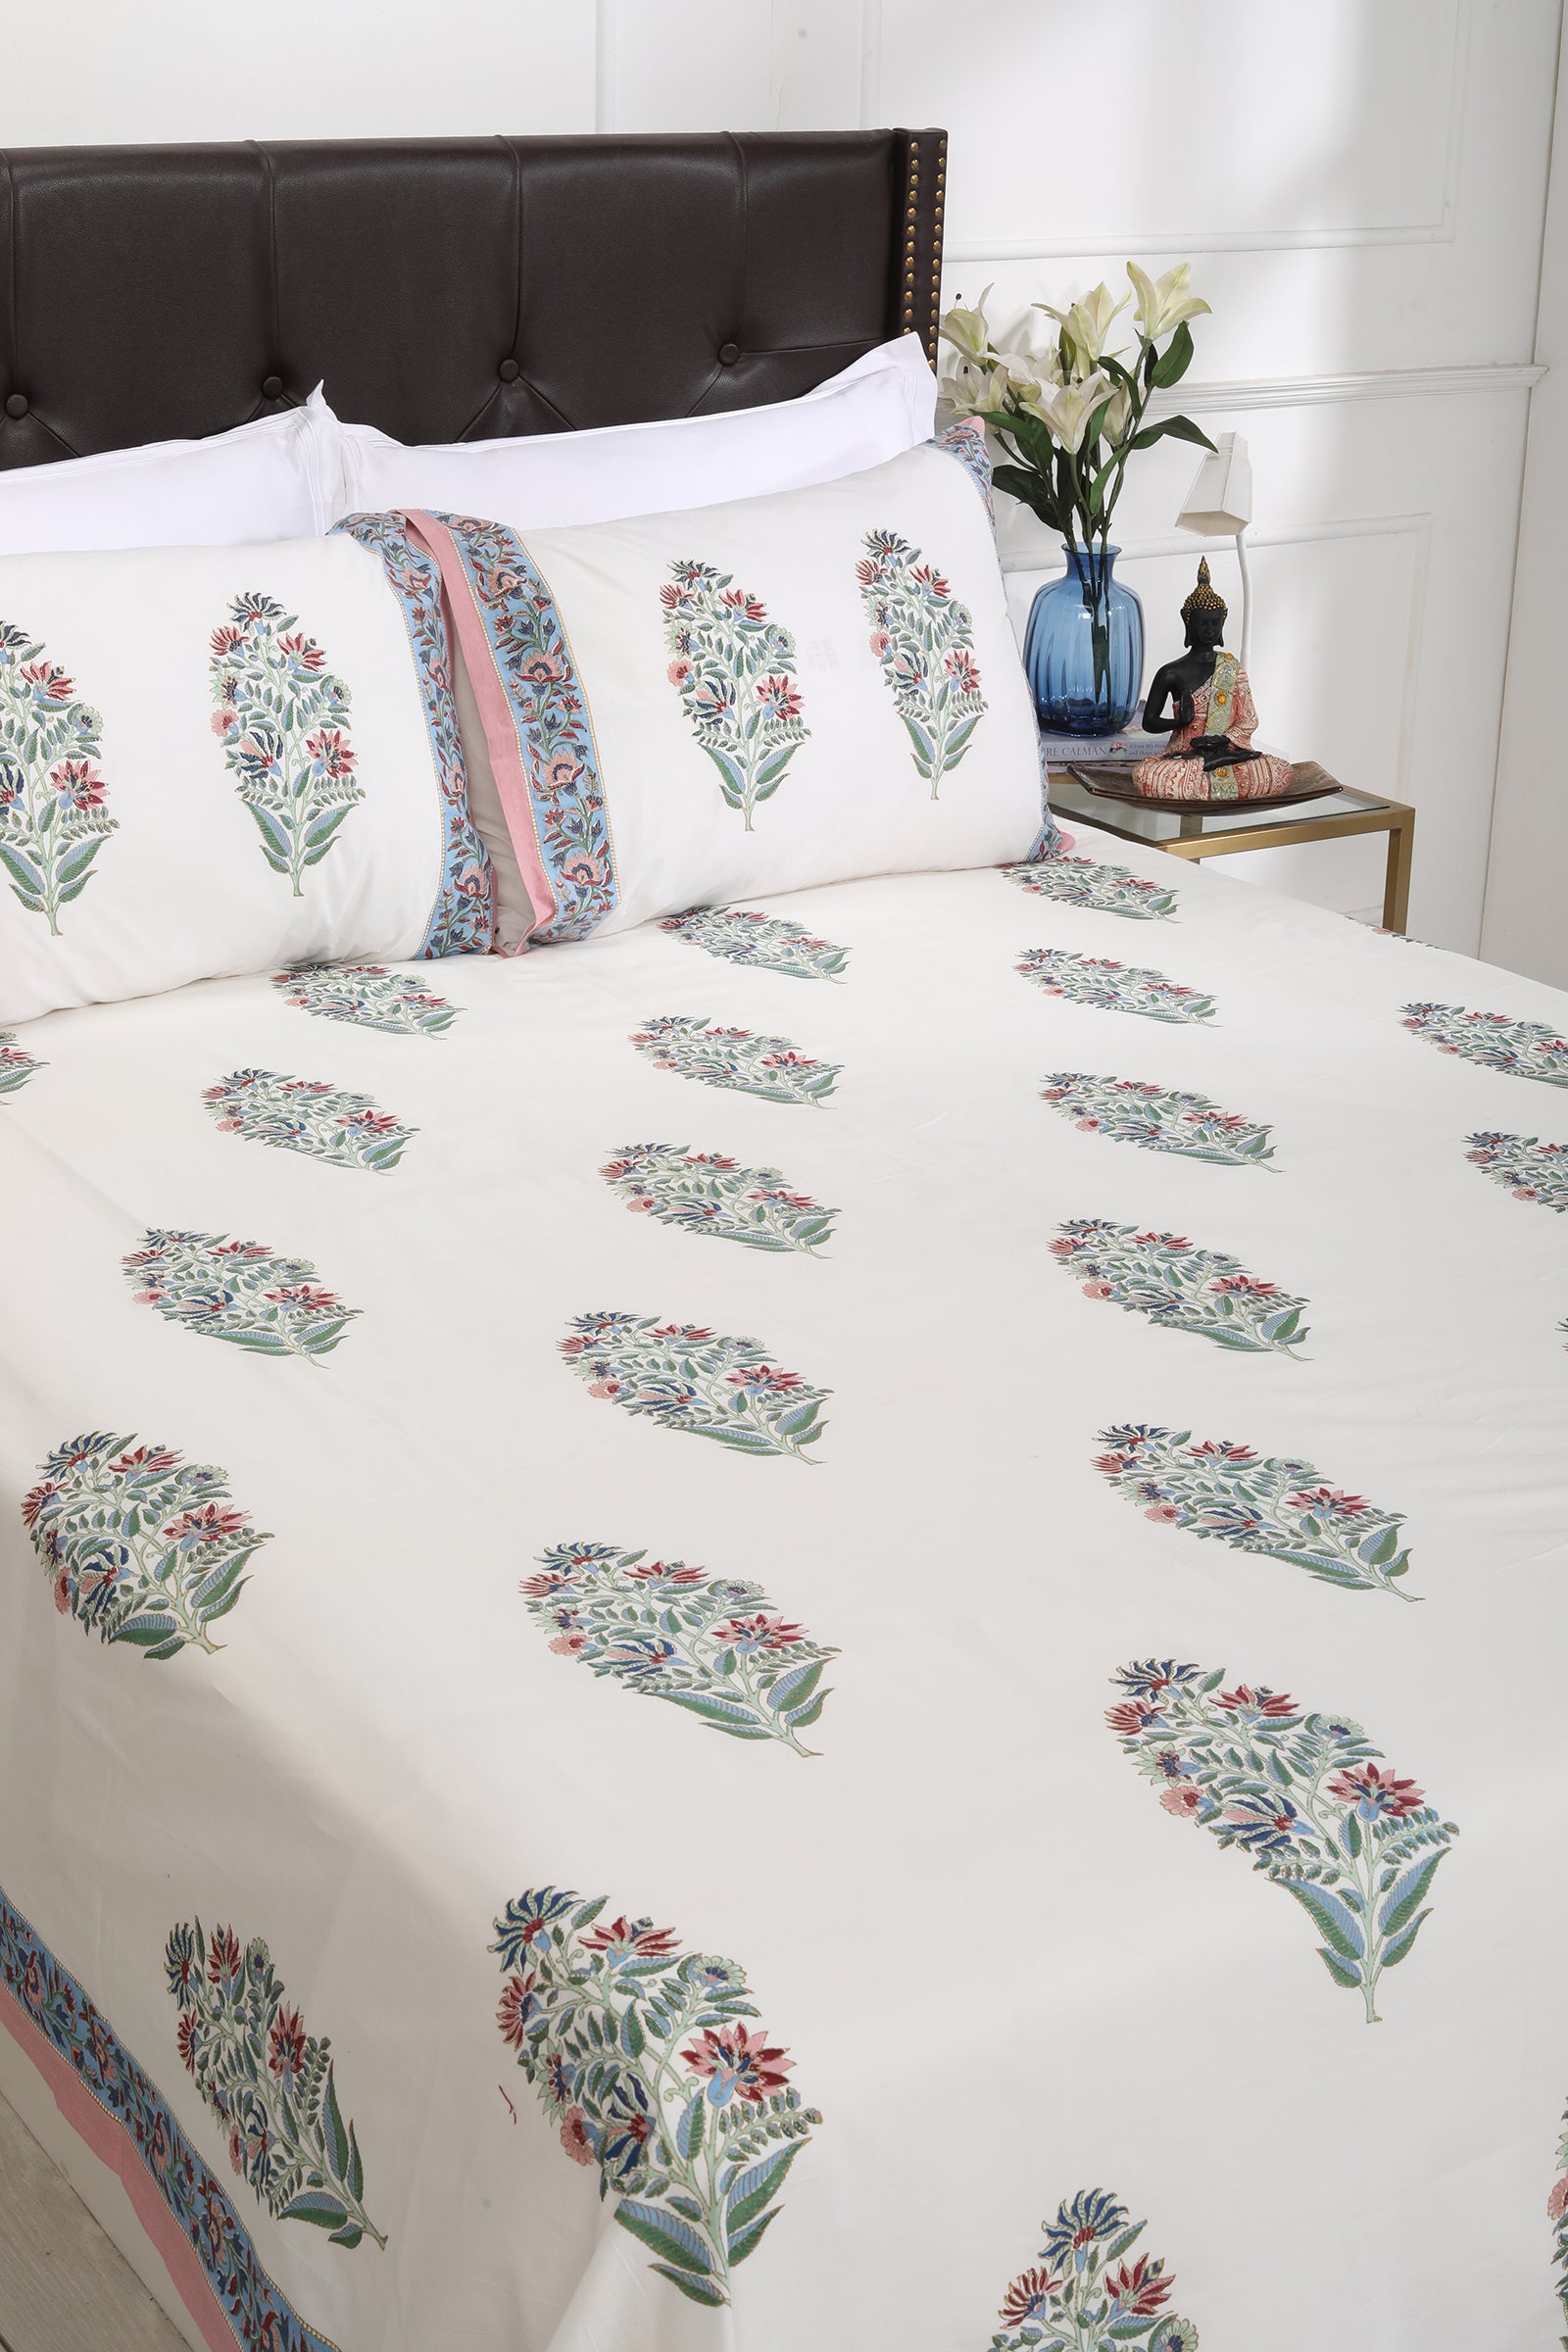 Bagh E Noor Cotton Percale Hand Block Printed Bedsheet - shahenazindia